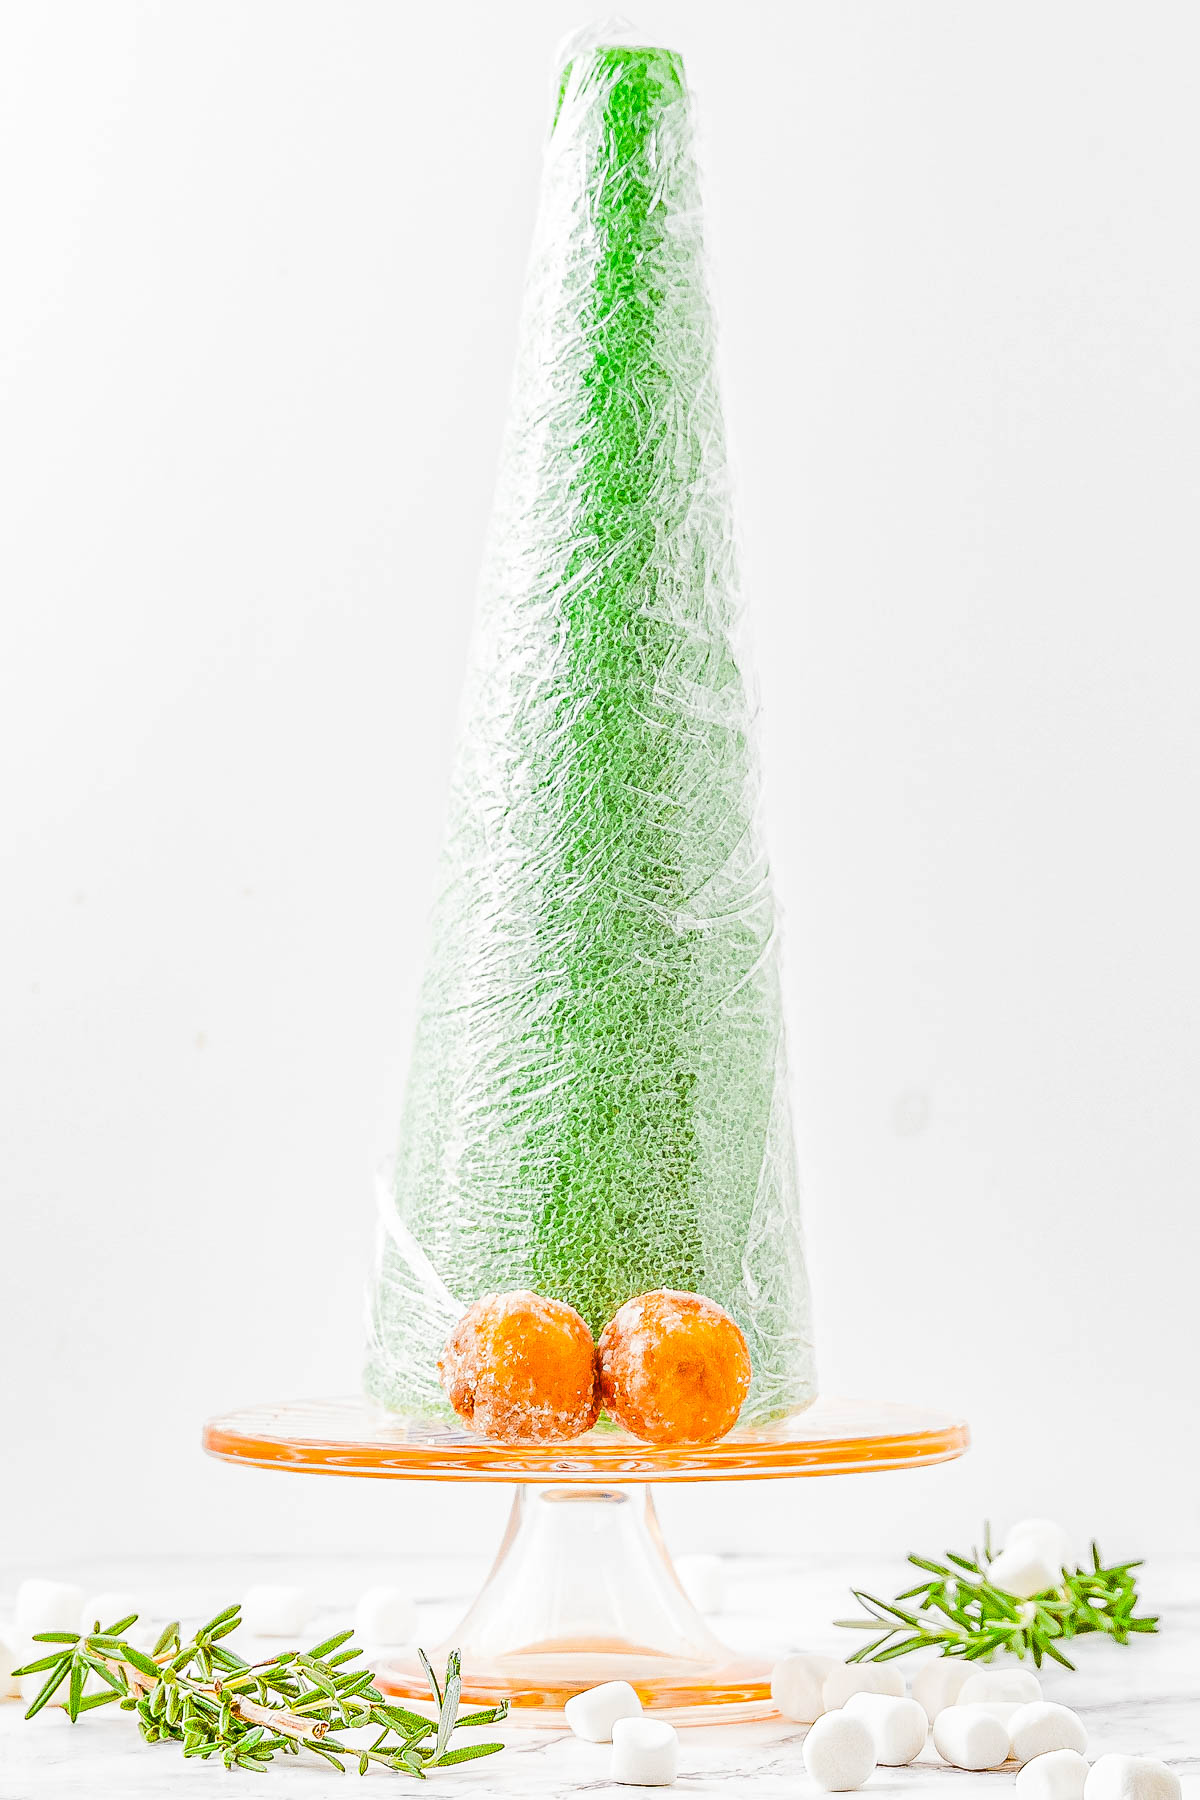 Donut Hole Christmas Tree — Looking for a QUICK and EASY, yet FESTIVE centerpiece for your holiday dessert table or brunch spread? Try making a Christmas tree out of donut holes! All you need is a styrofoam cone from the craft store and some store-bought donut holes. Decorate your tree however you want, then let guests help themselves!   